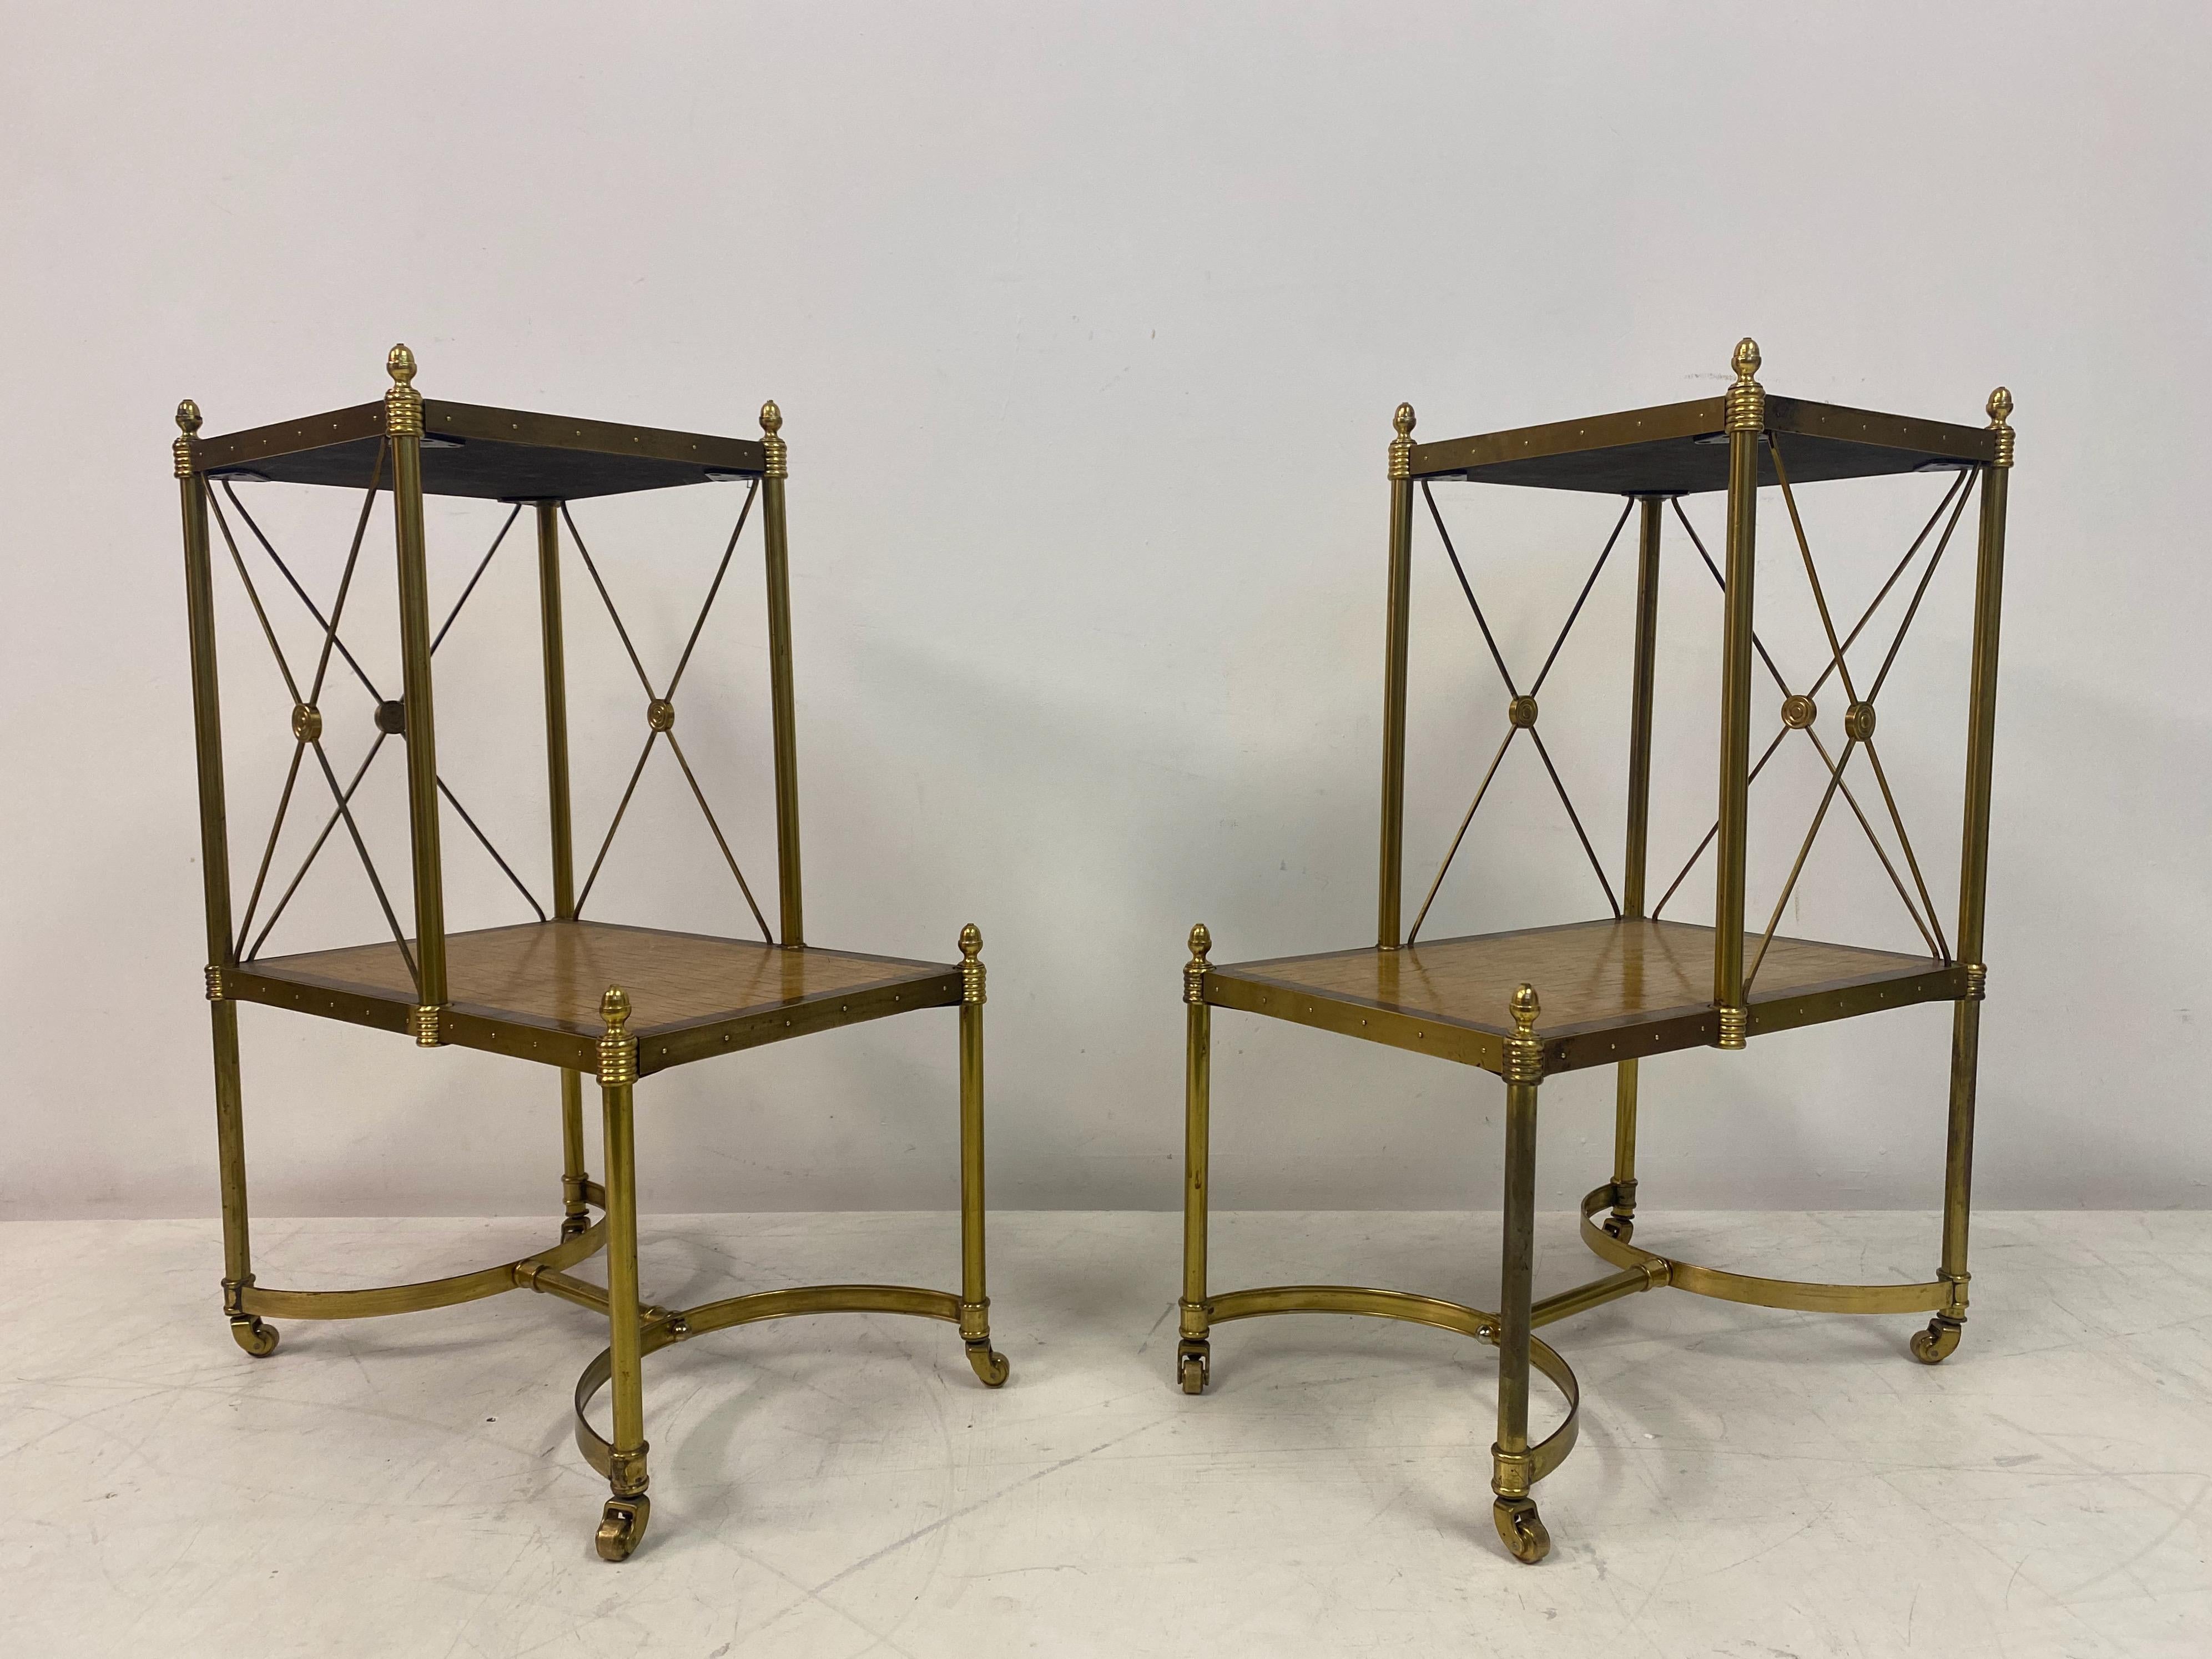 Pair of etagere side tables

Two tier

Brass frame

X supports

Maple tops 

Mid to late 20th century.